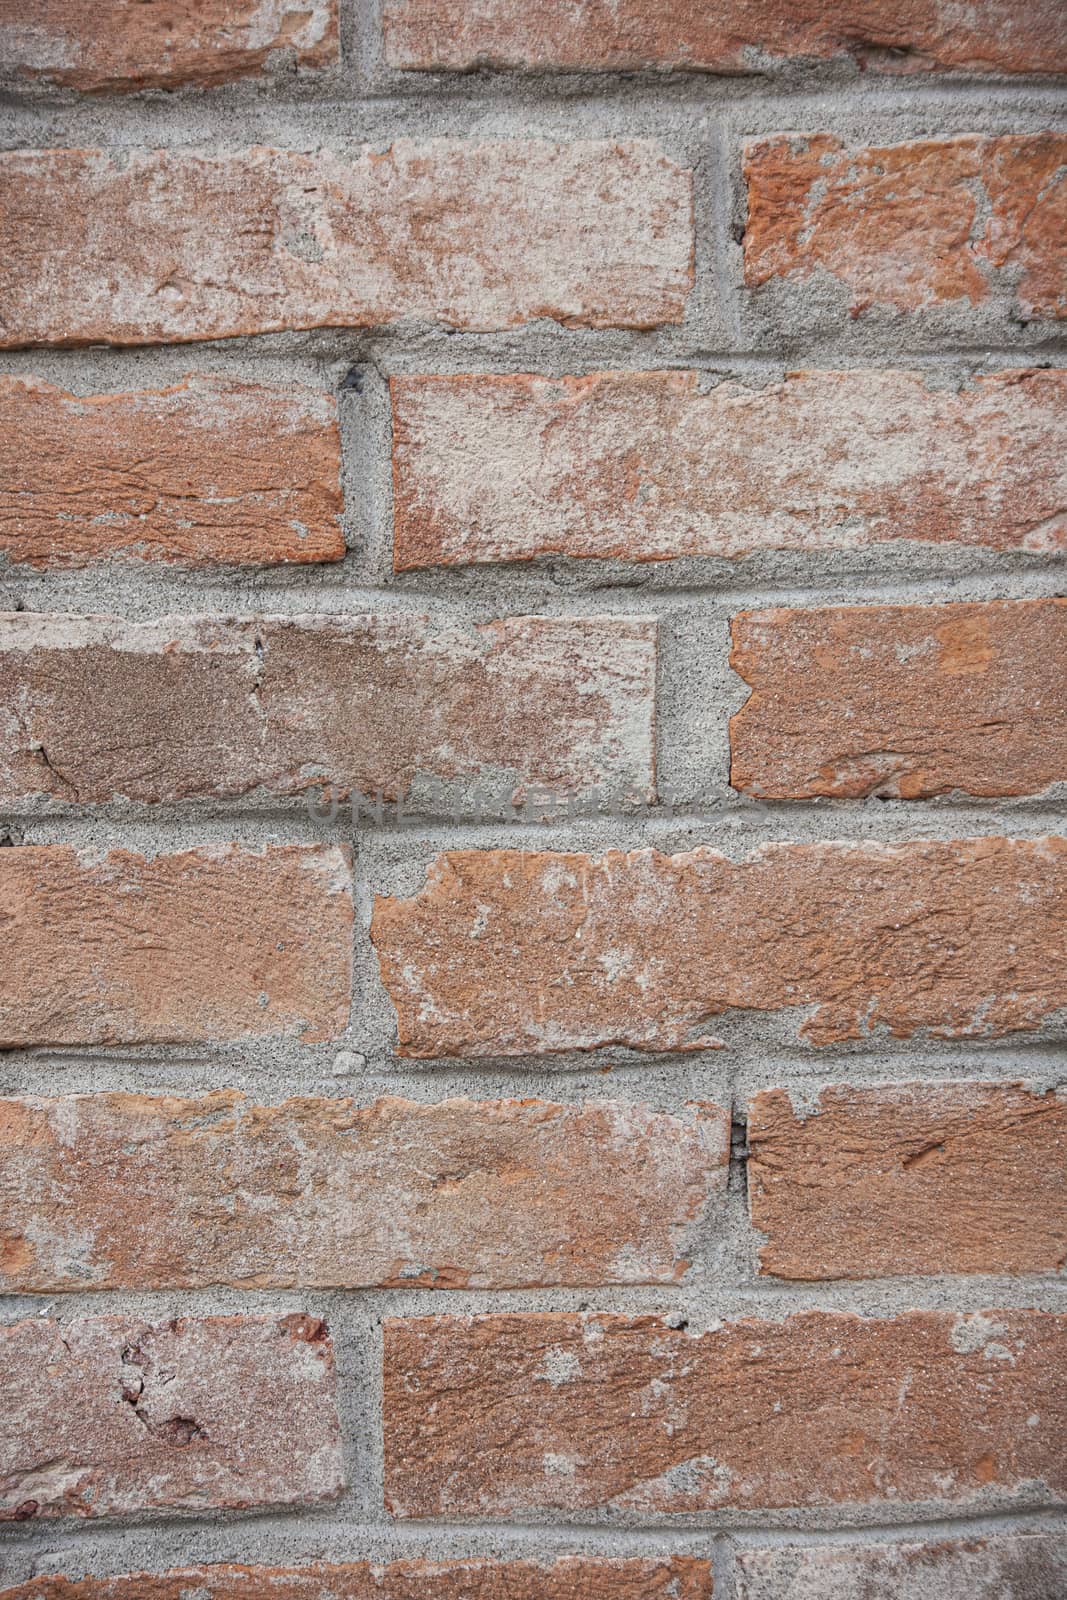 Brick texture detail 2 by pippocarlot